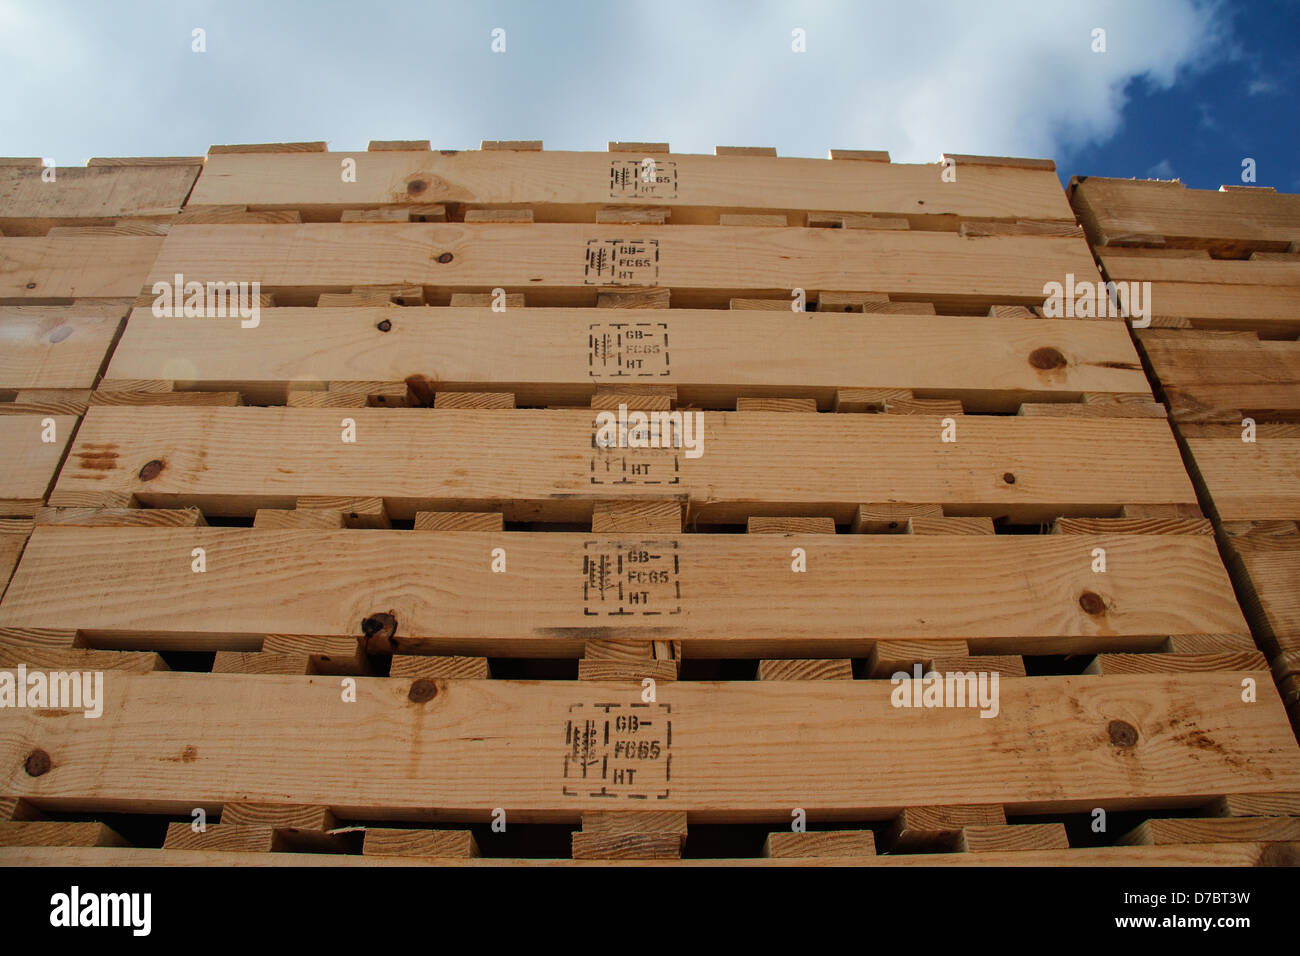 Stack of wooden pallets with heat treated markings Stock Photo